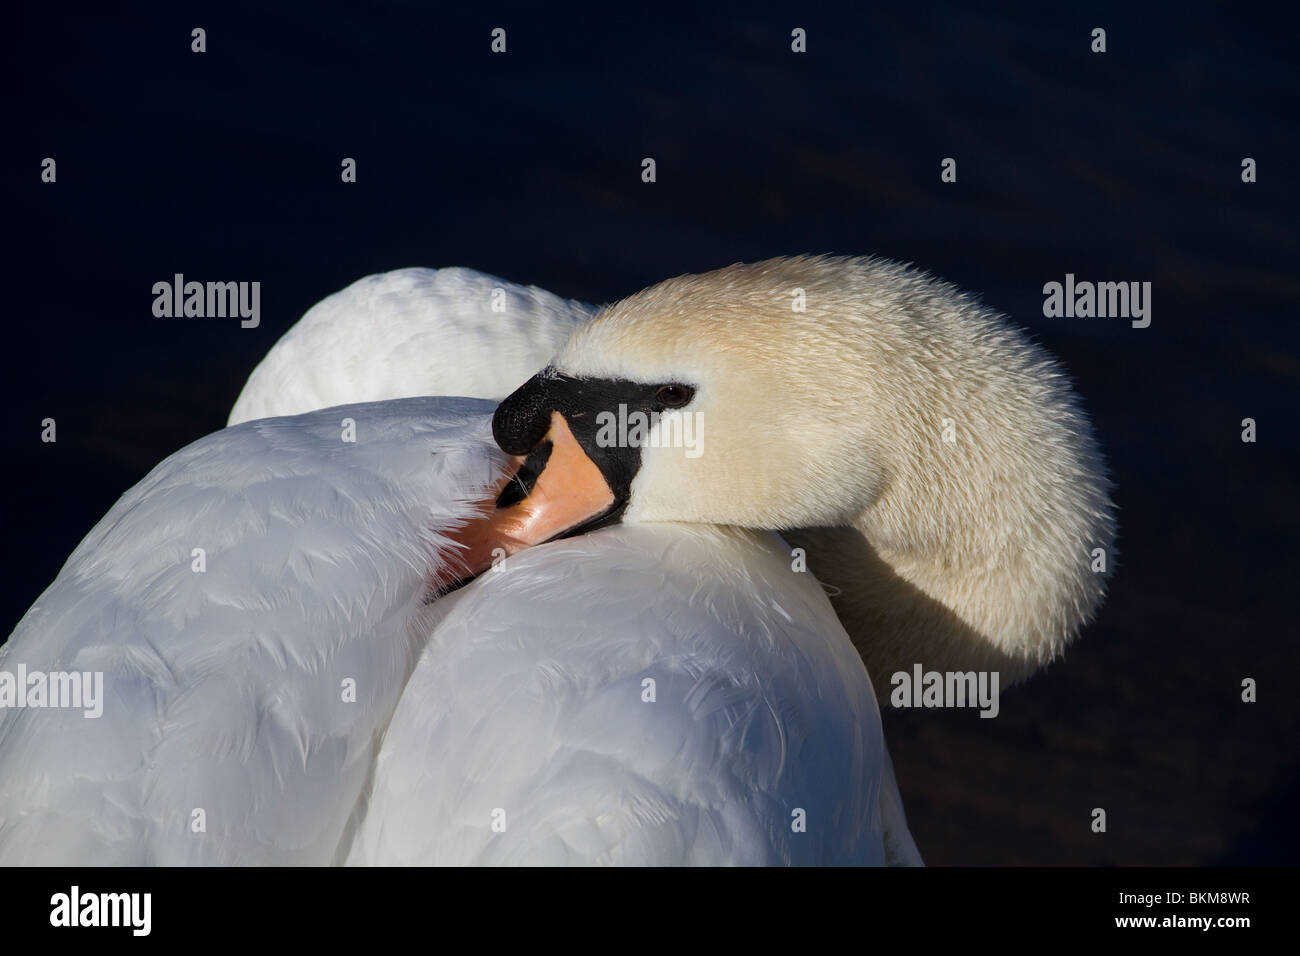 Close up portrait of a mute swan sleeping, showing a side profile with beak tucked into his wing against a dark blue background. Stock Photo